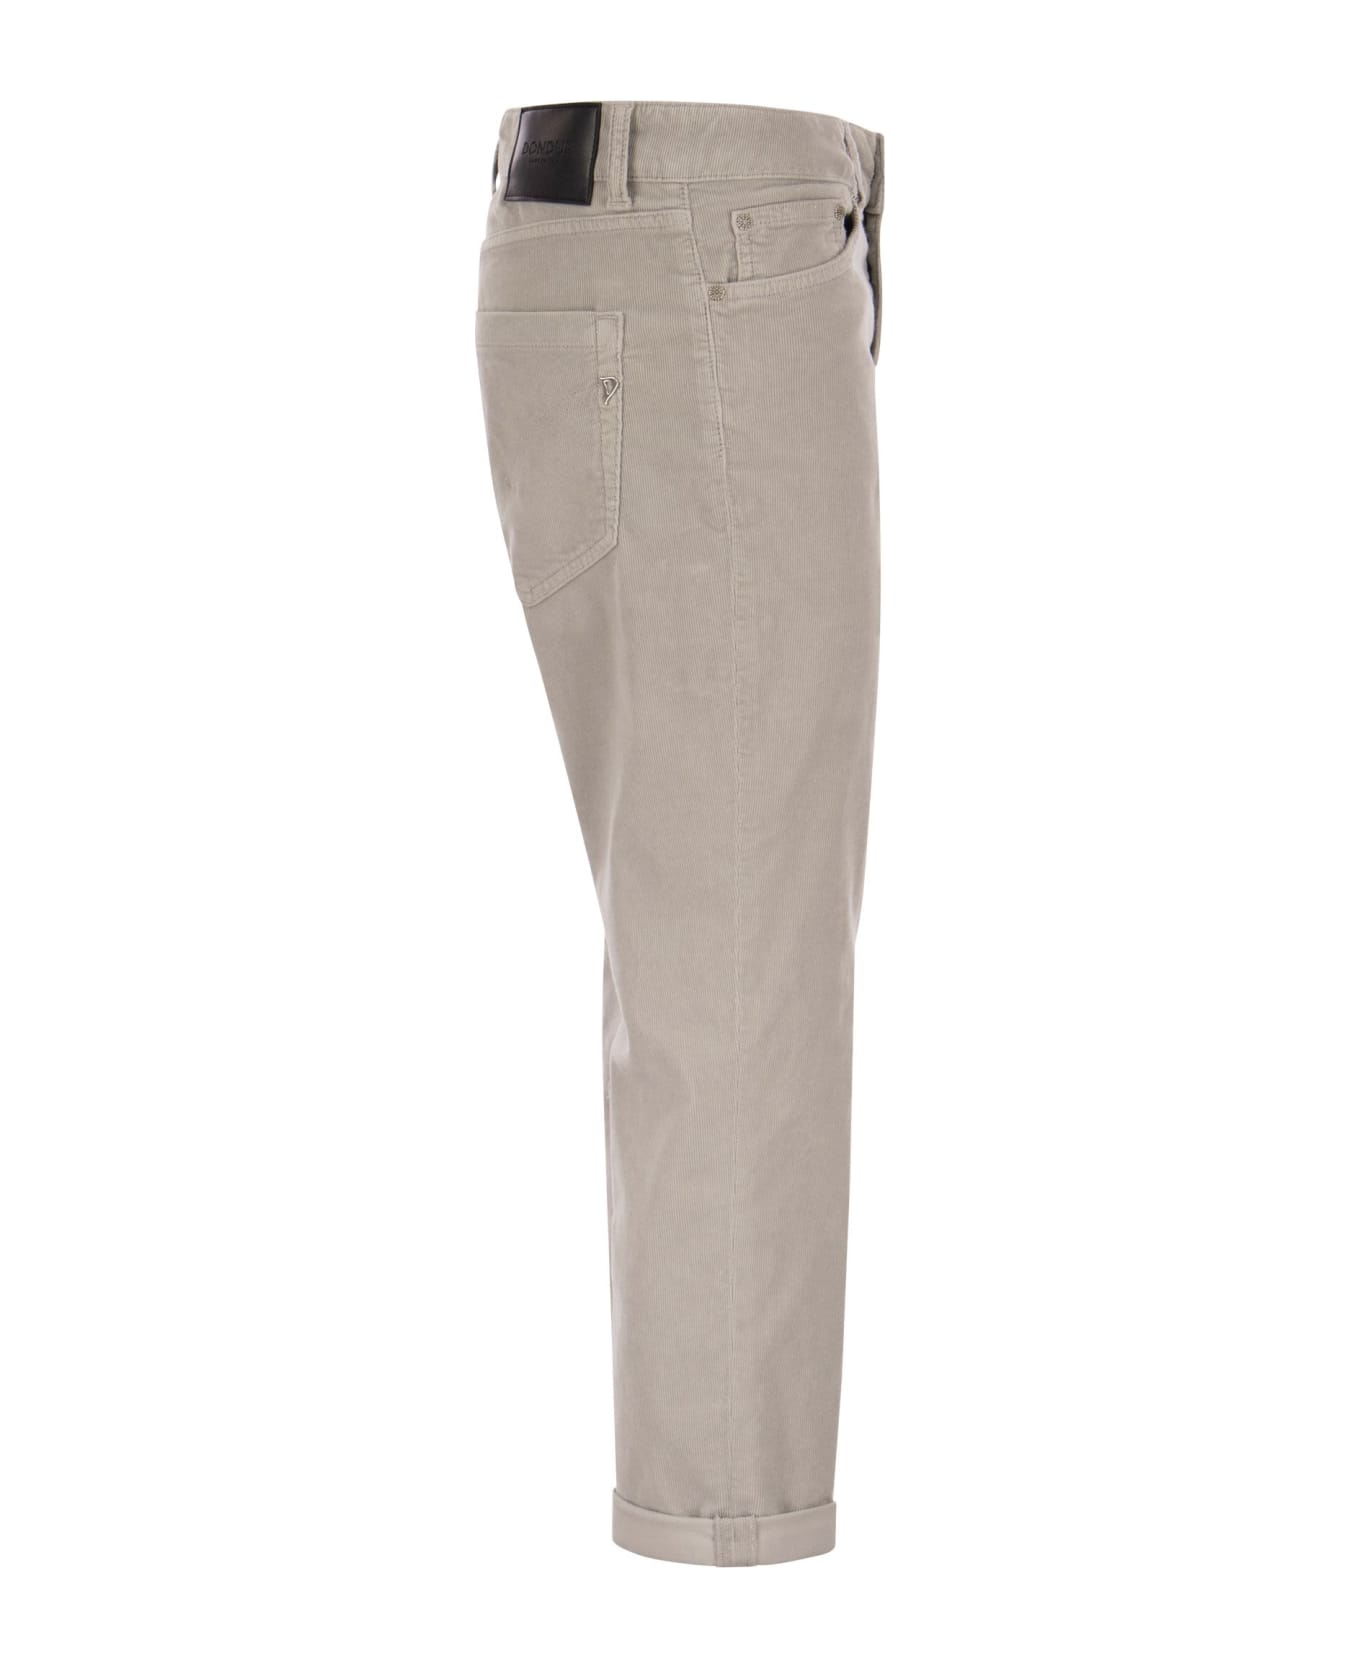 Dondup Koons - Multi-striped Velvet Trousers With Jewelled Buttons - Light Grey デニム